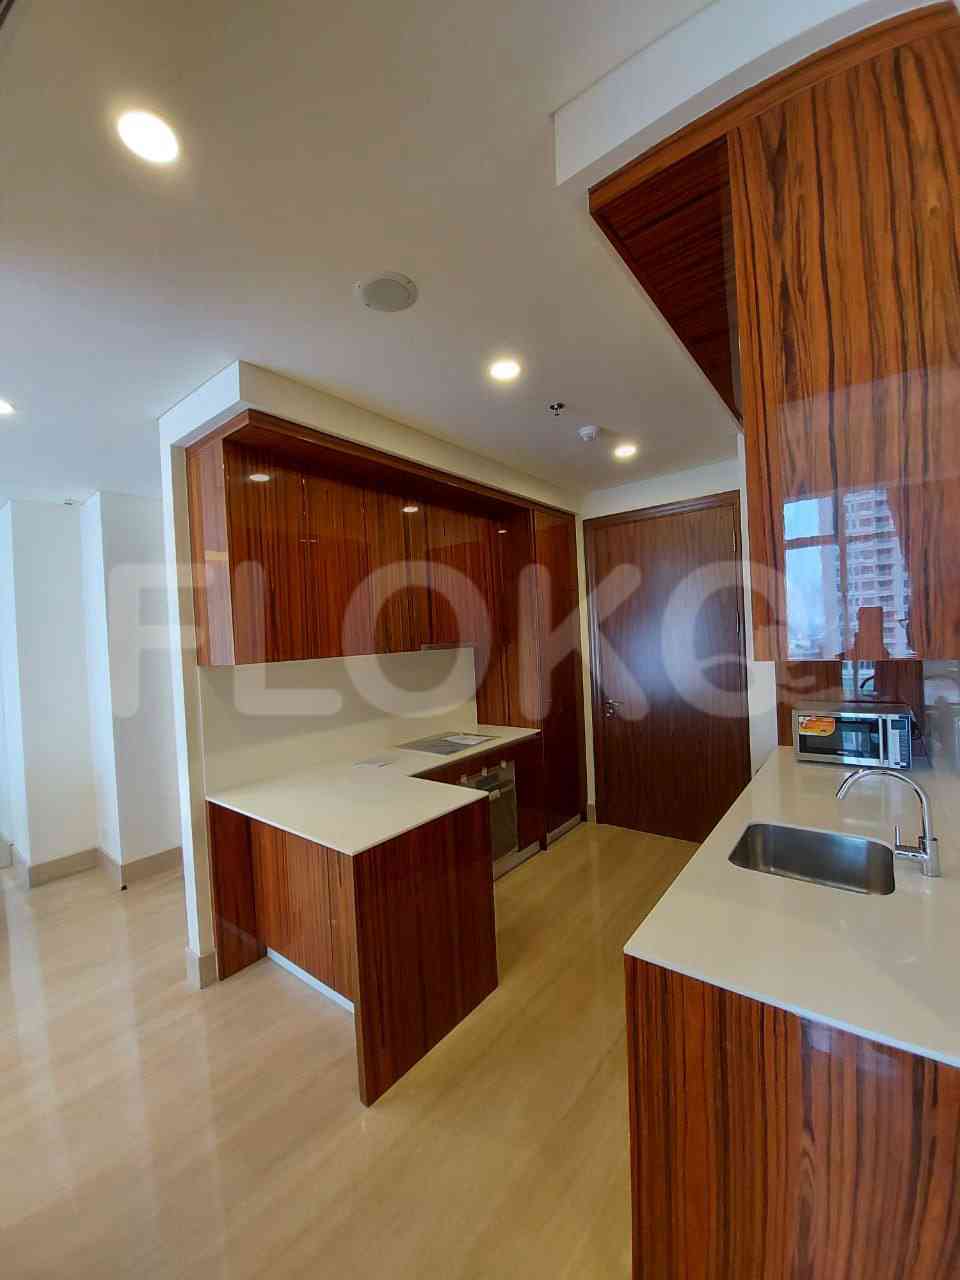 2 Bedroom on 20th Floor for Rent in South Hills Apartment - fku012 4